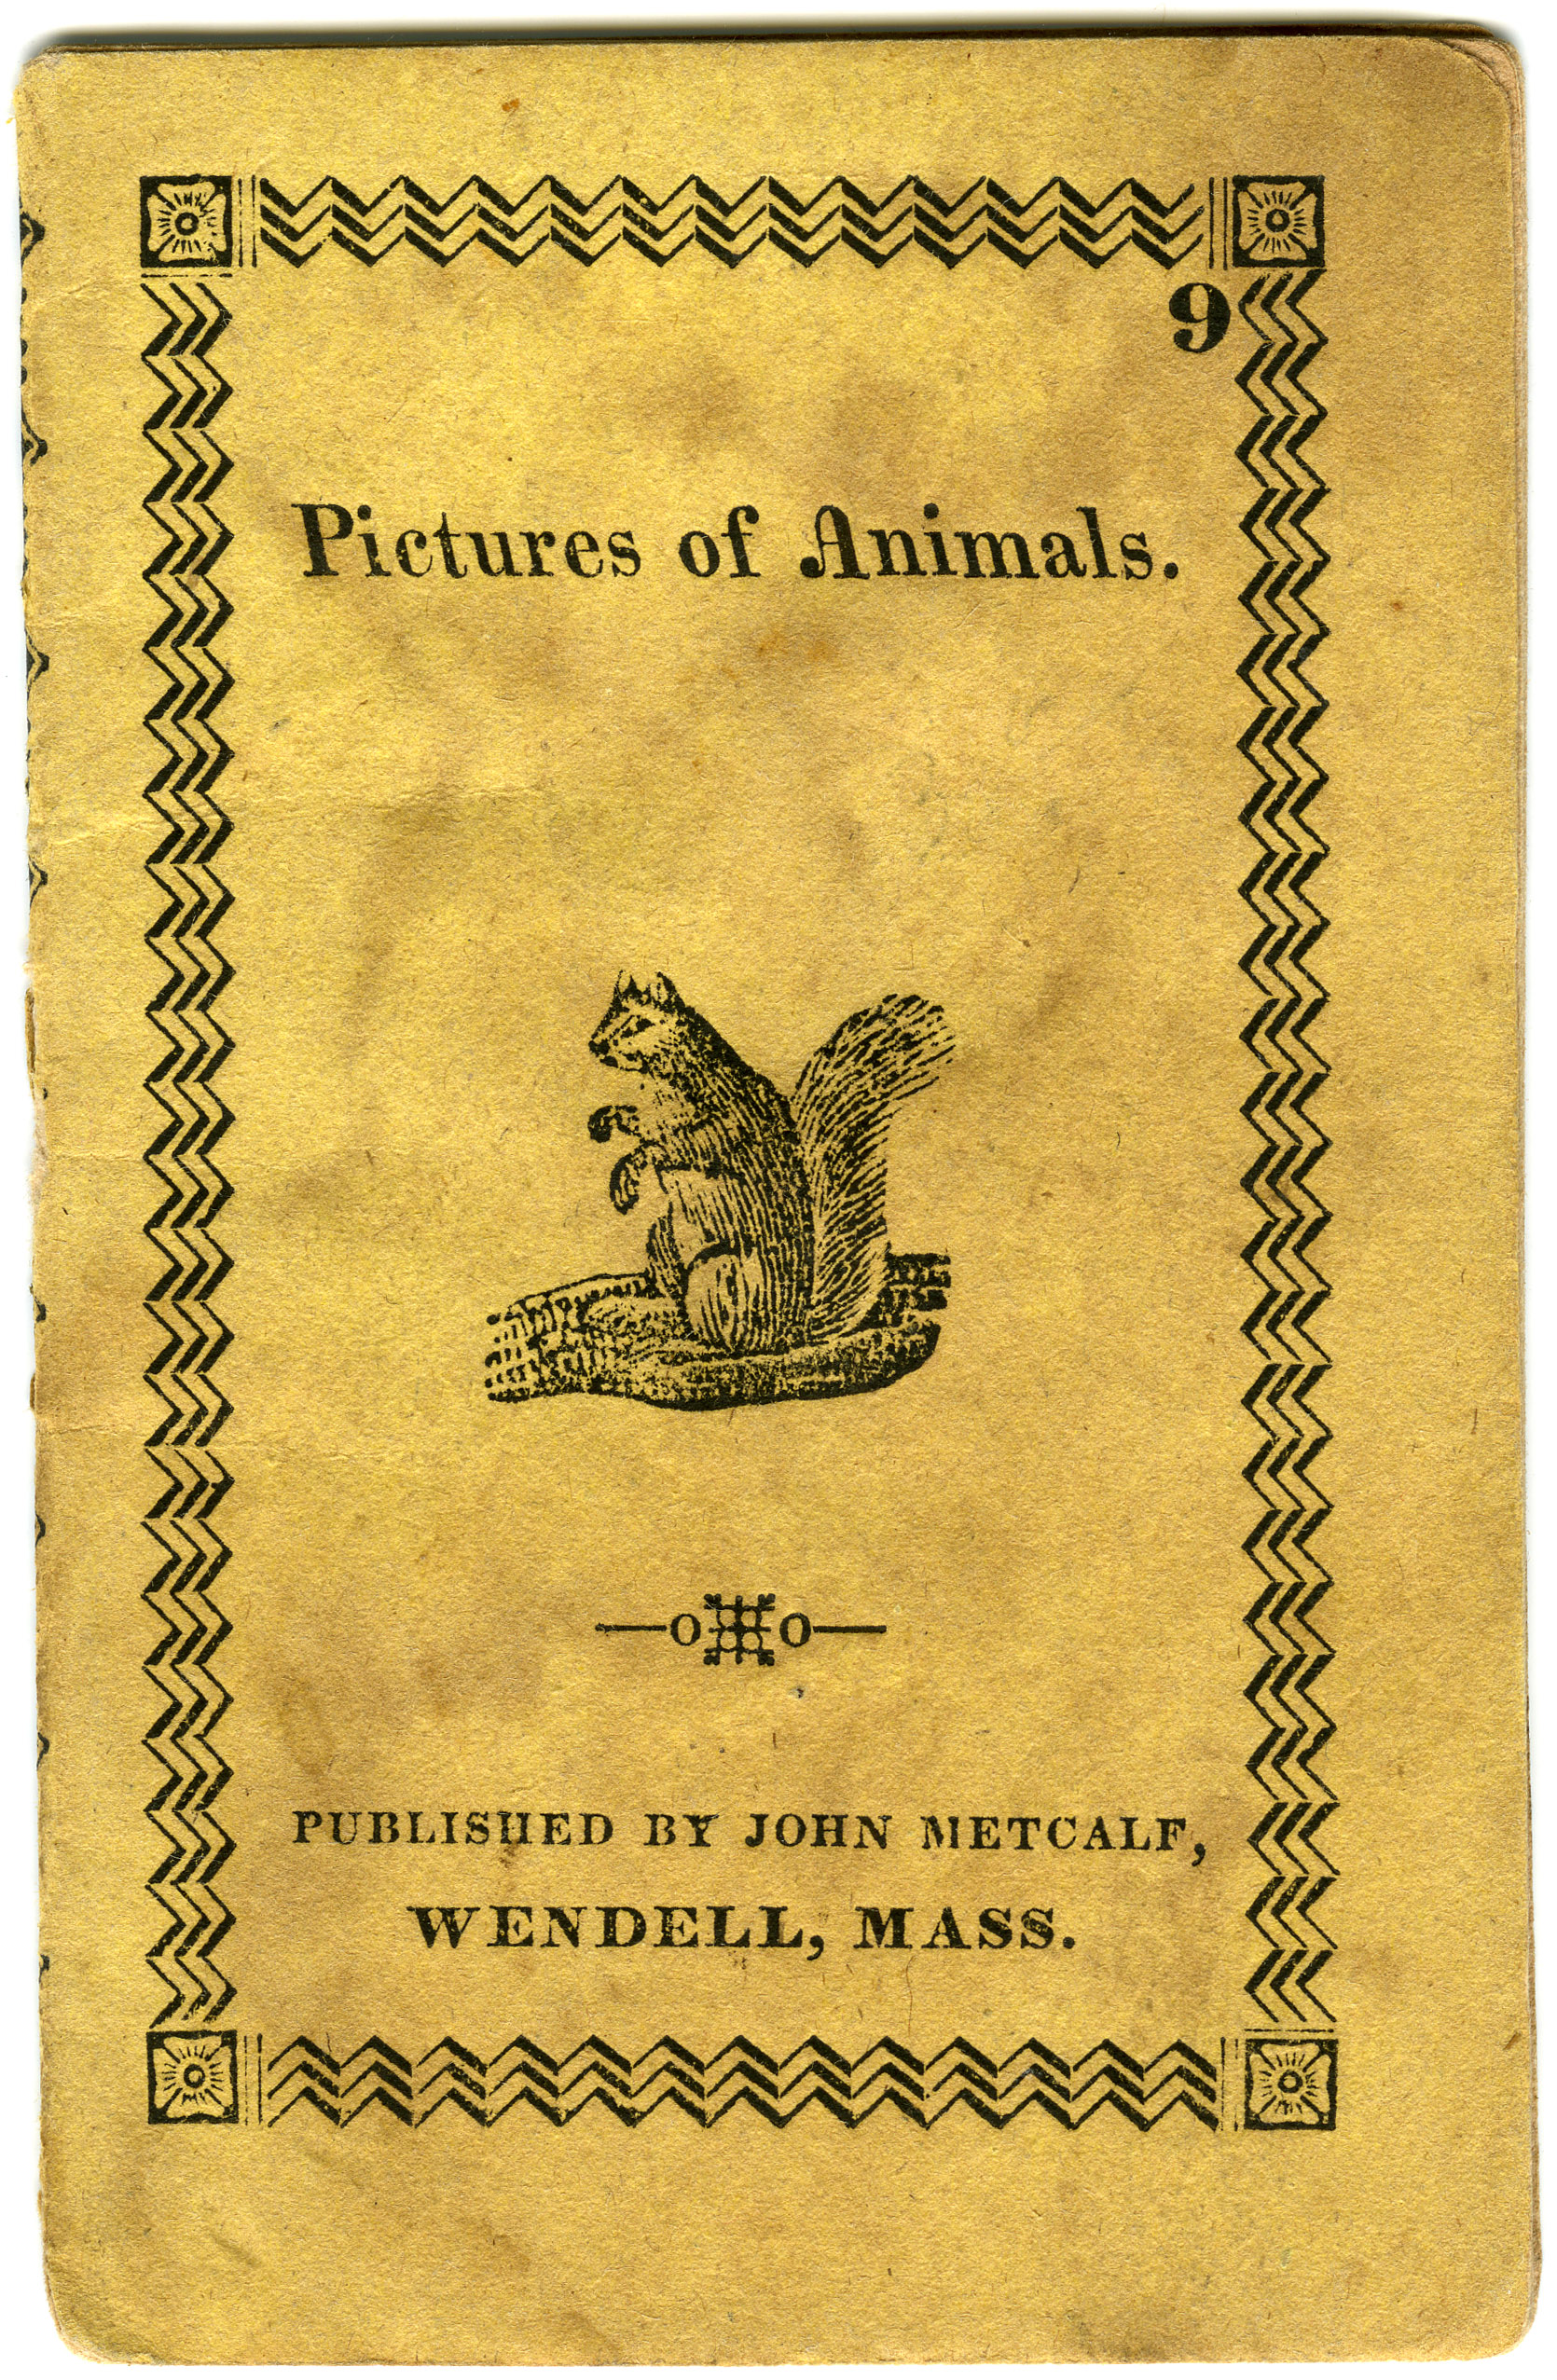 
An image of: John Metcalf's Pictures of animals